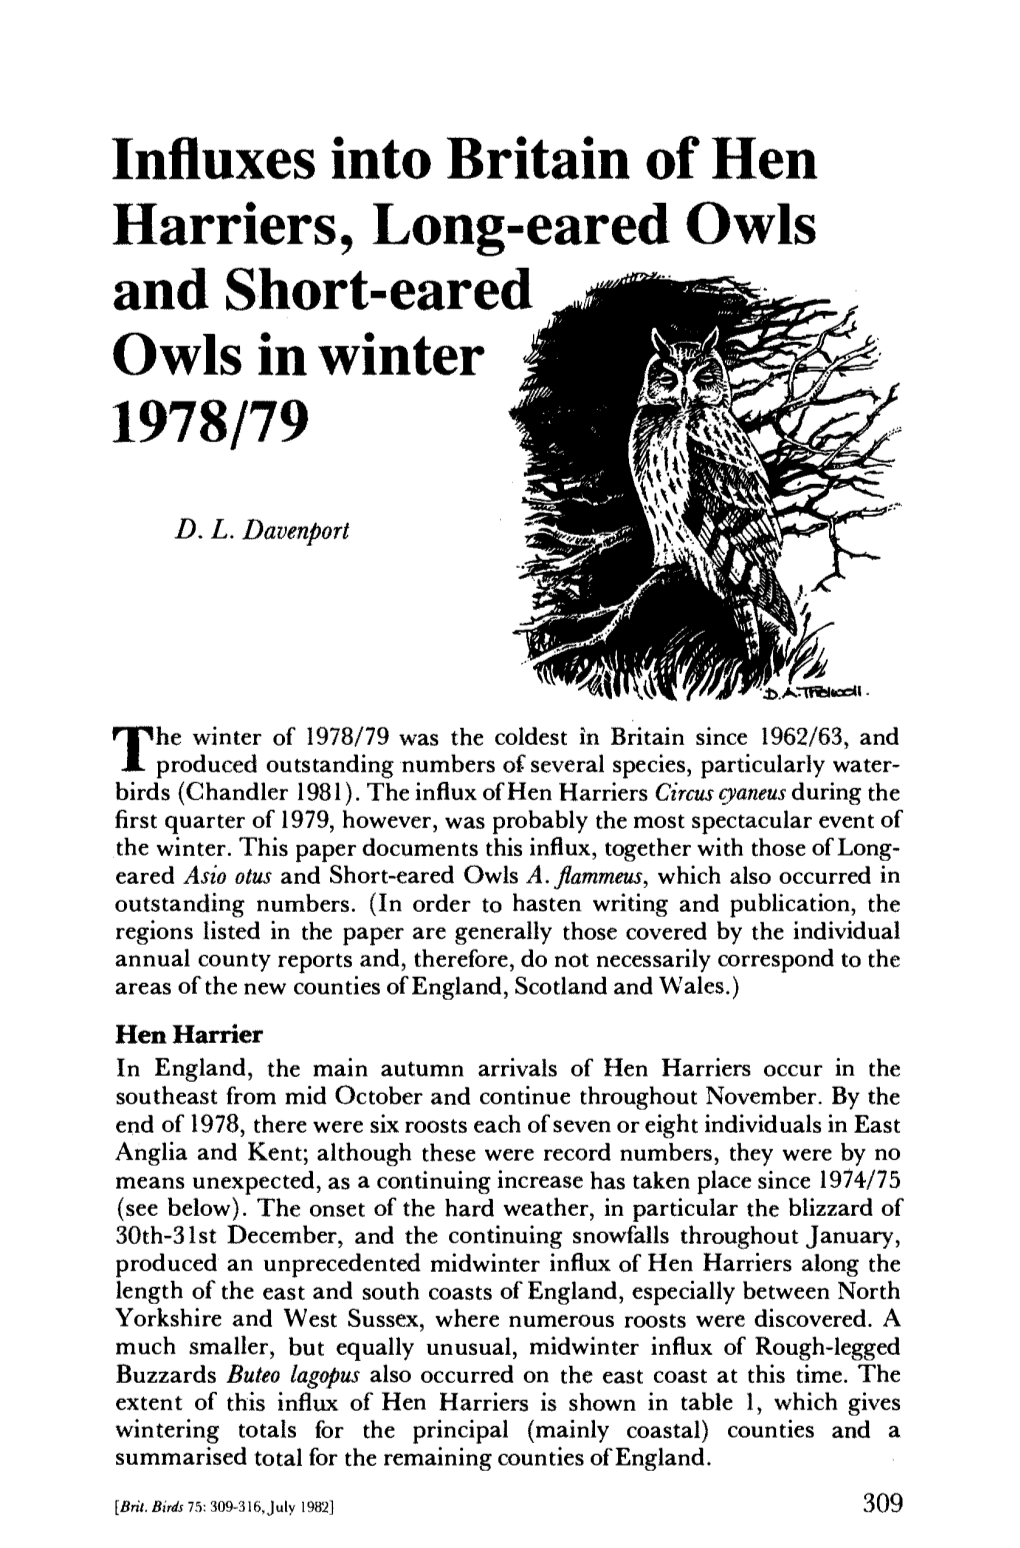 Influxes Into Britain of Hen Harriers, Long-Eared Owls and Short-Eared Owls in Winter 1978/79